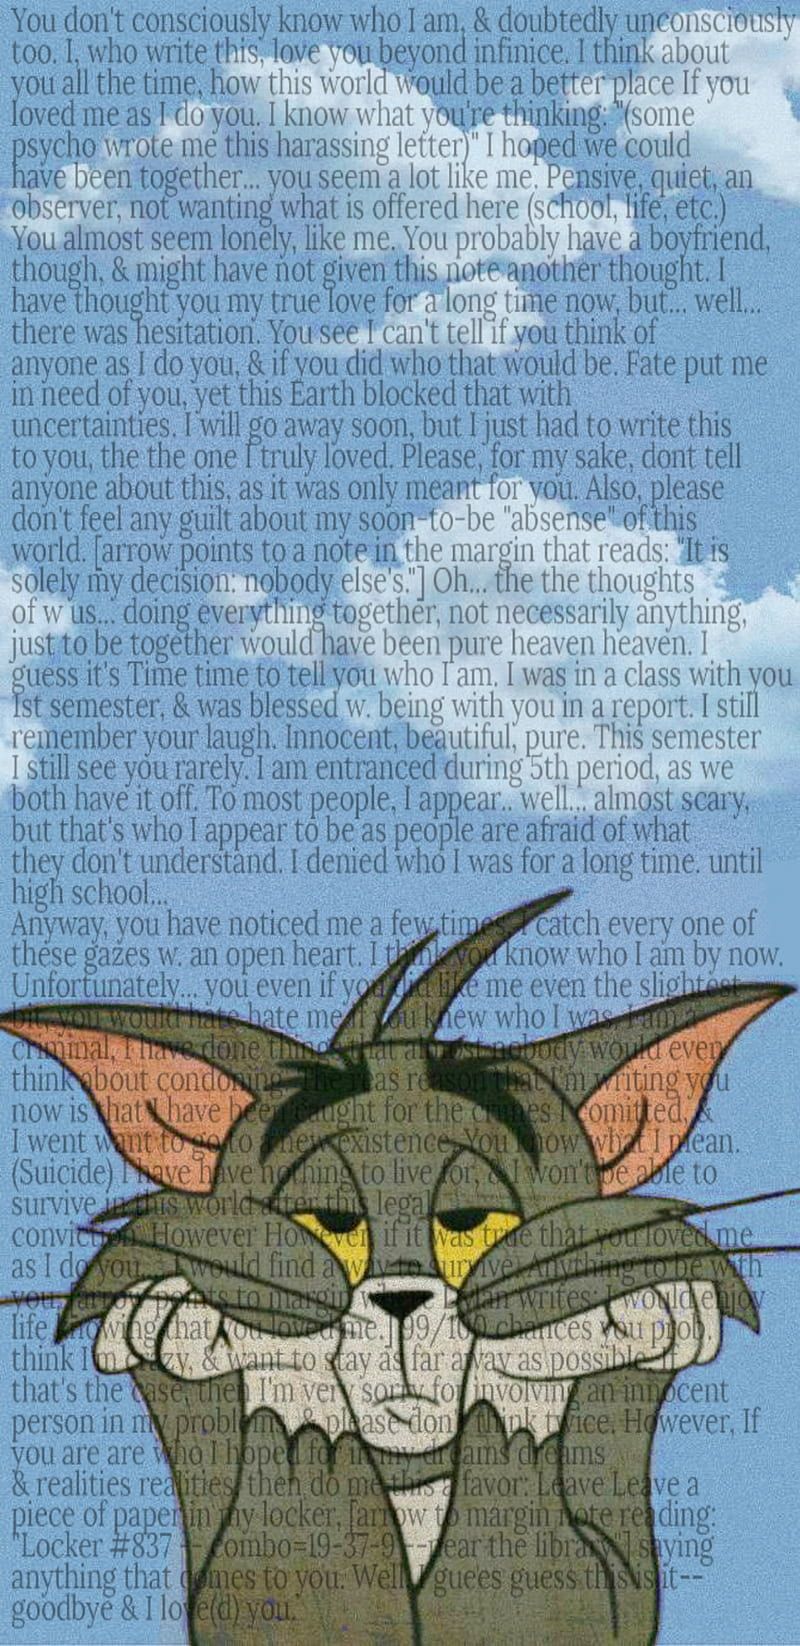 Tom the cat from Tom and Jerry, with a quote from the book. - Tom and Jerry